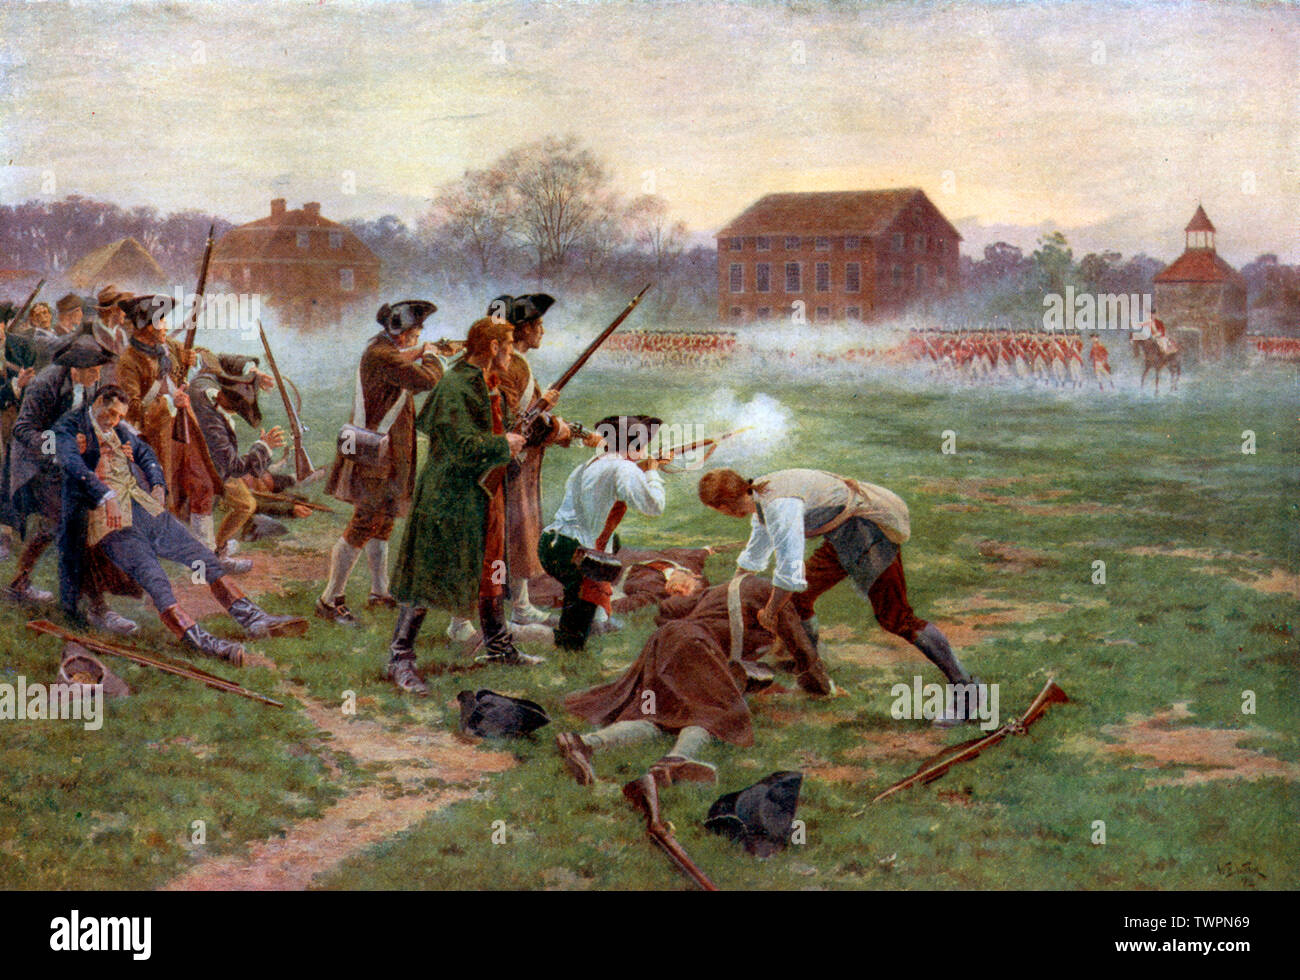 'The First Fight for Independence, Lexington Common, April 19th, 1775' (1910). By William Barnes Wollen (1857-1936). The Battles of Lexington and Concord were the first military engagements of the American Revolutionary War. Stock Photo